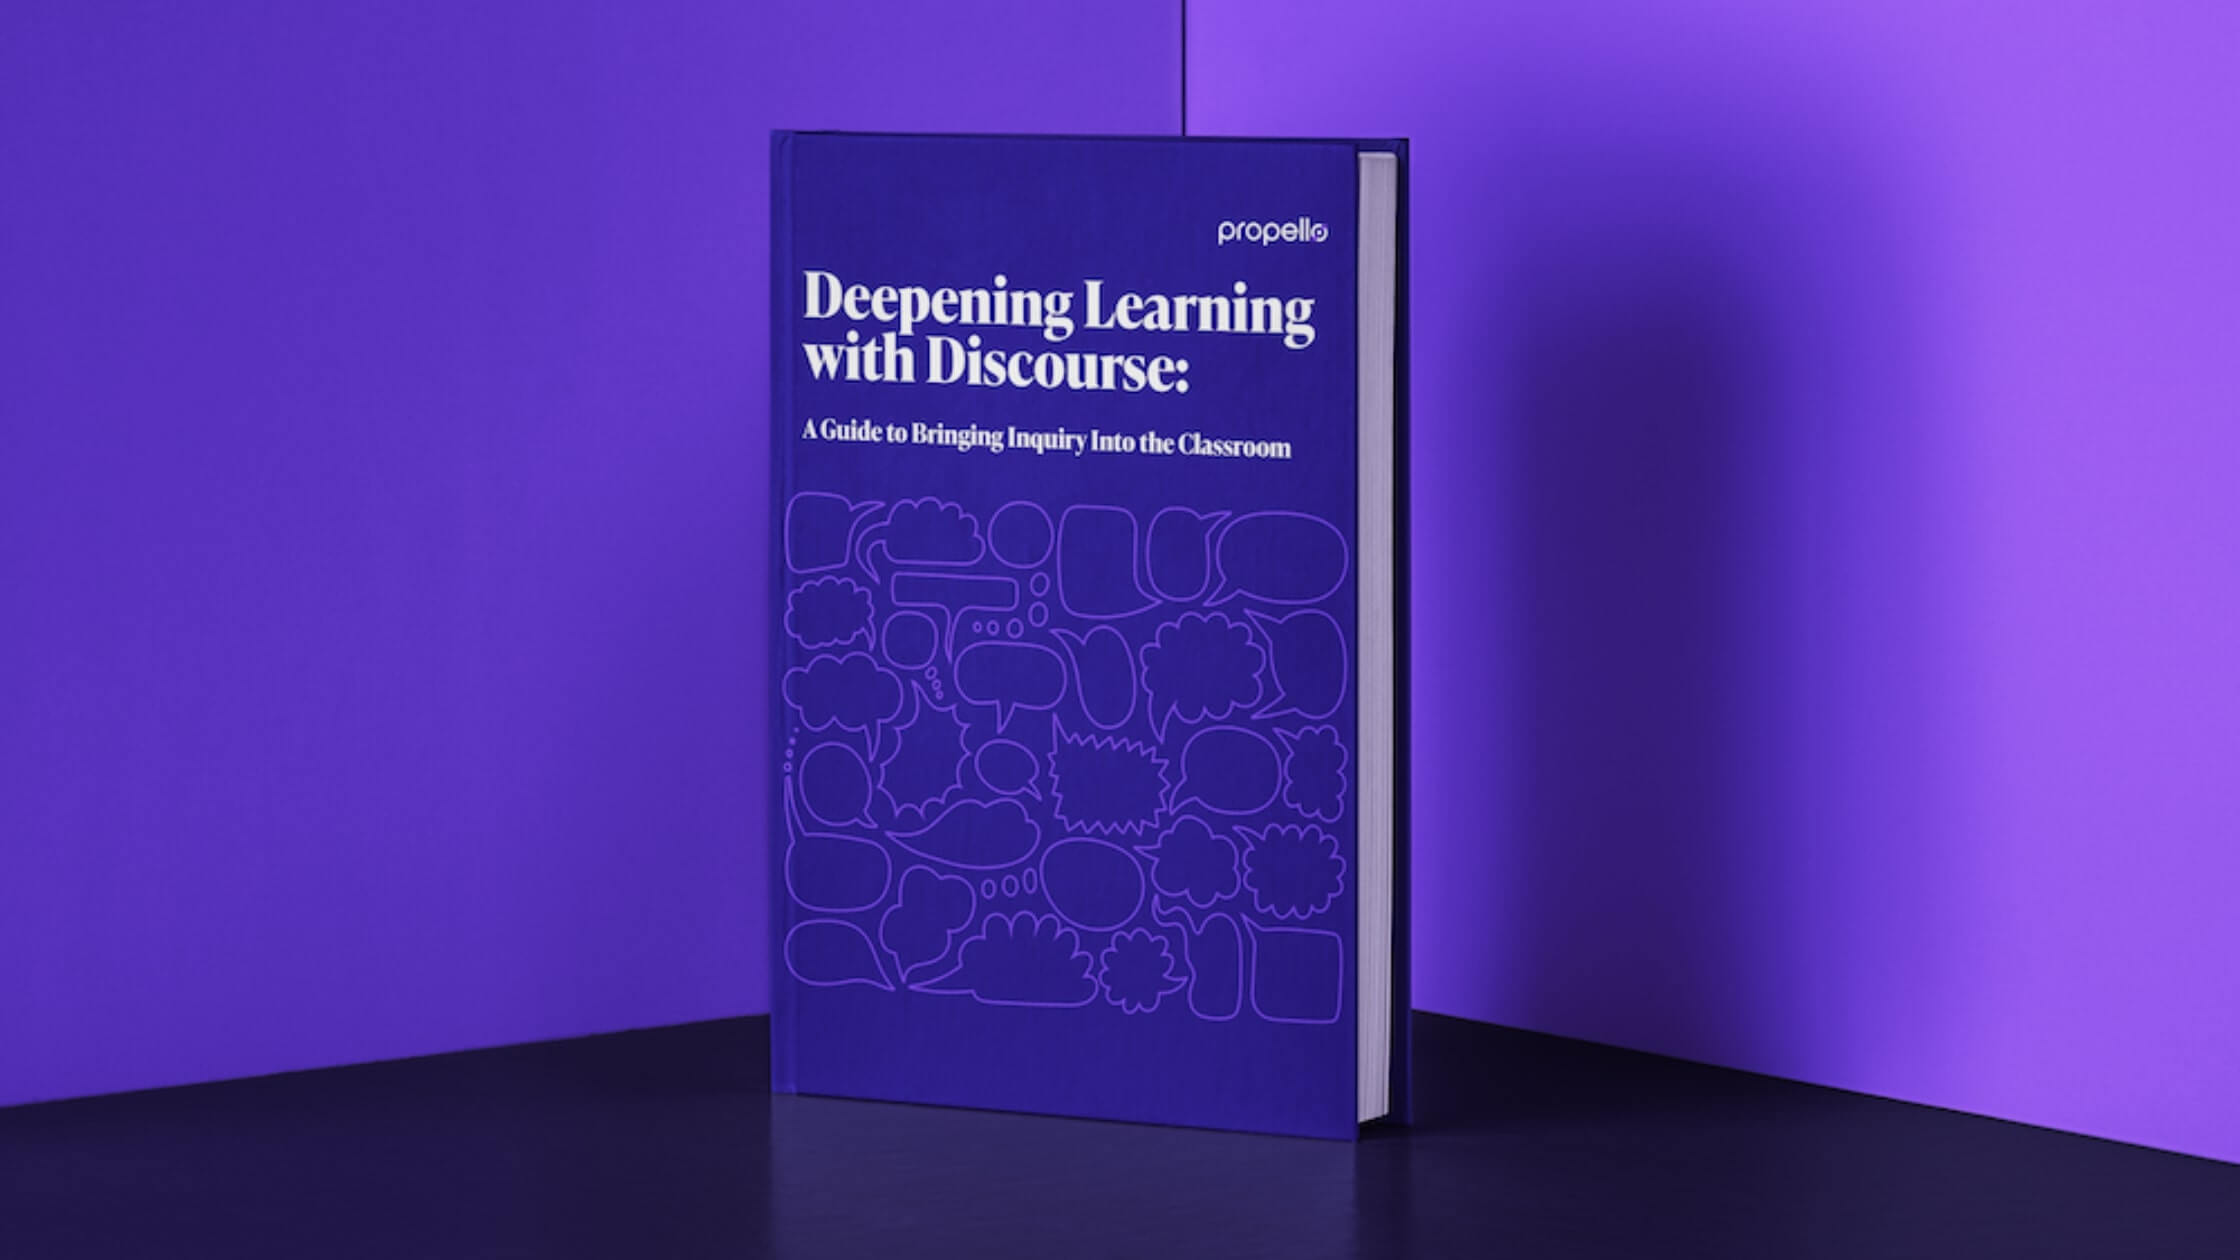 Deepening Learning with Discourse